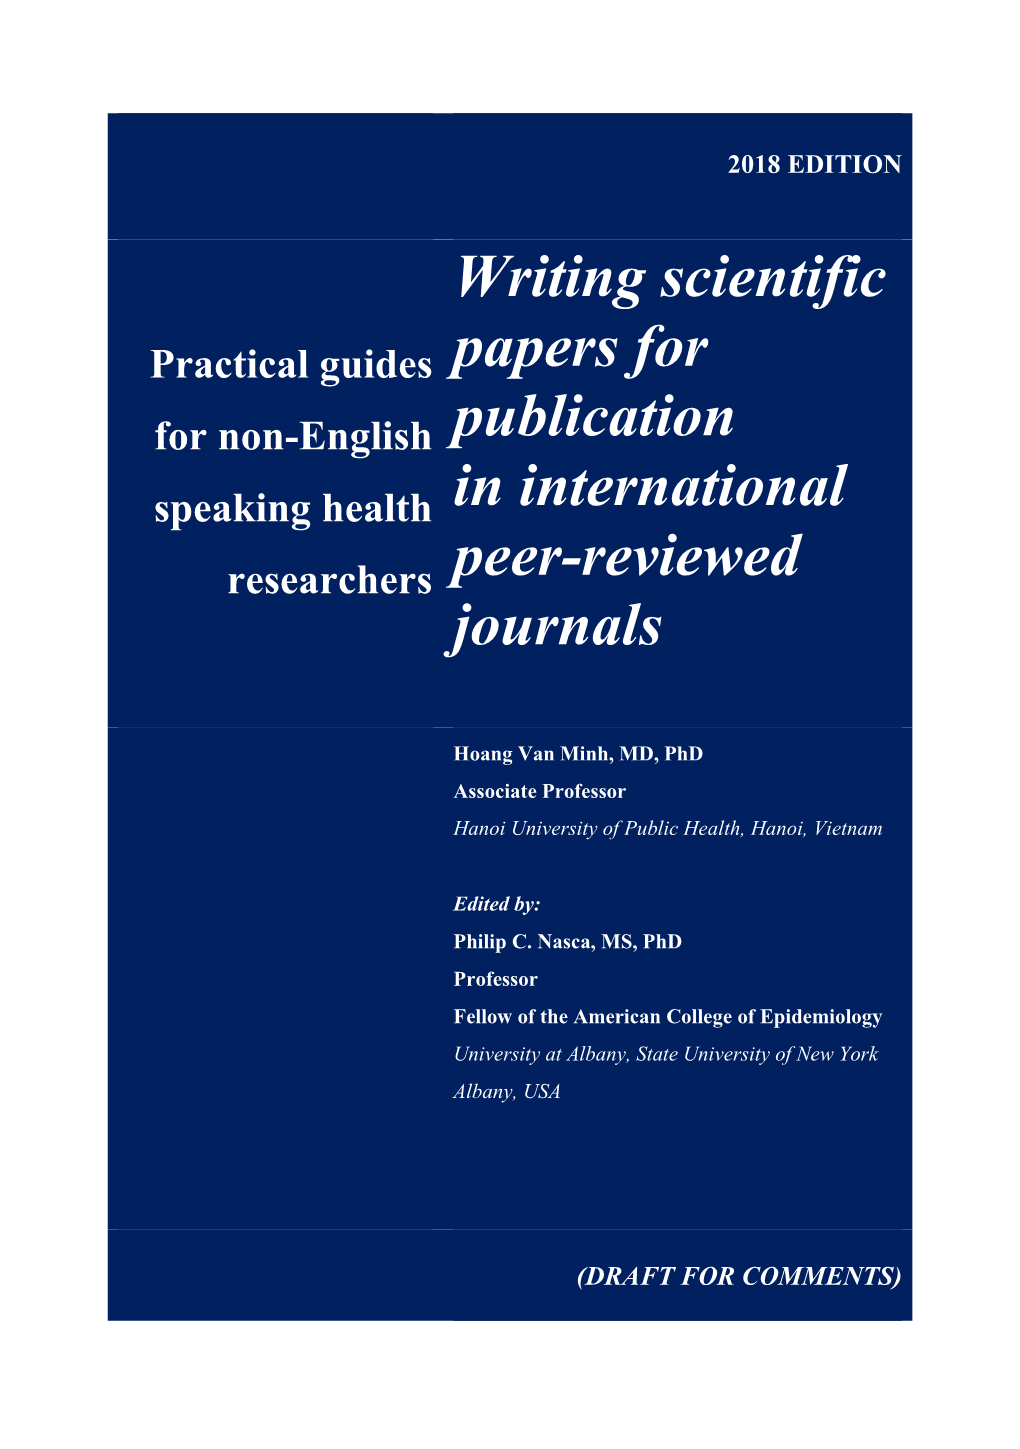 Writing Scientific Papers for Publication in International Peer-Reviewed Journals